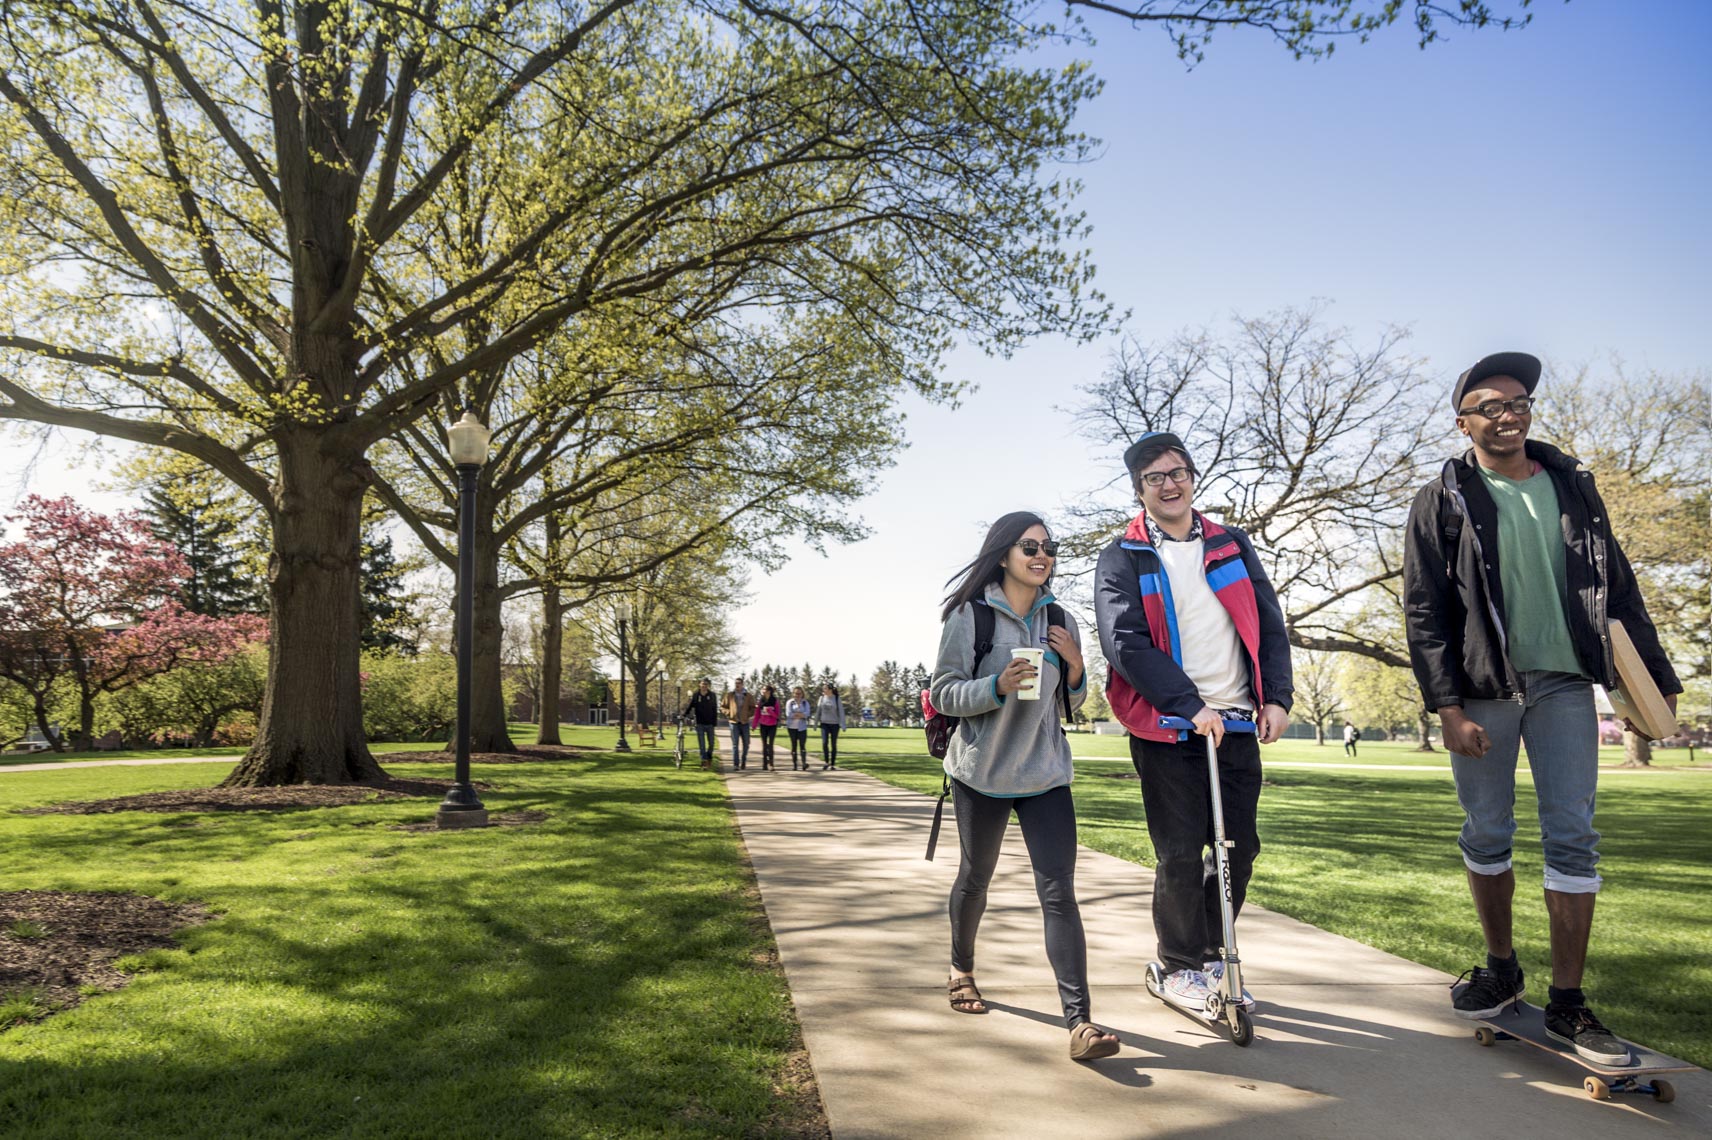 Three college students laugh while walking and scooting on campus in a photo by Ryan Donnell